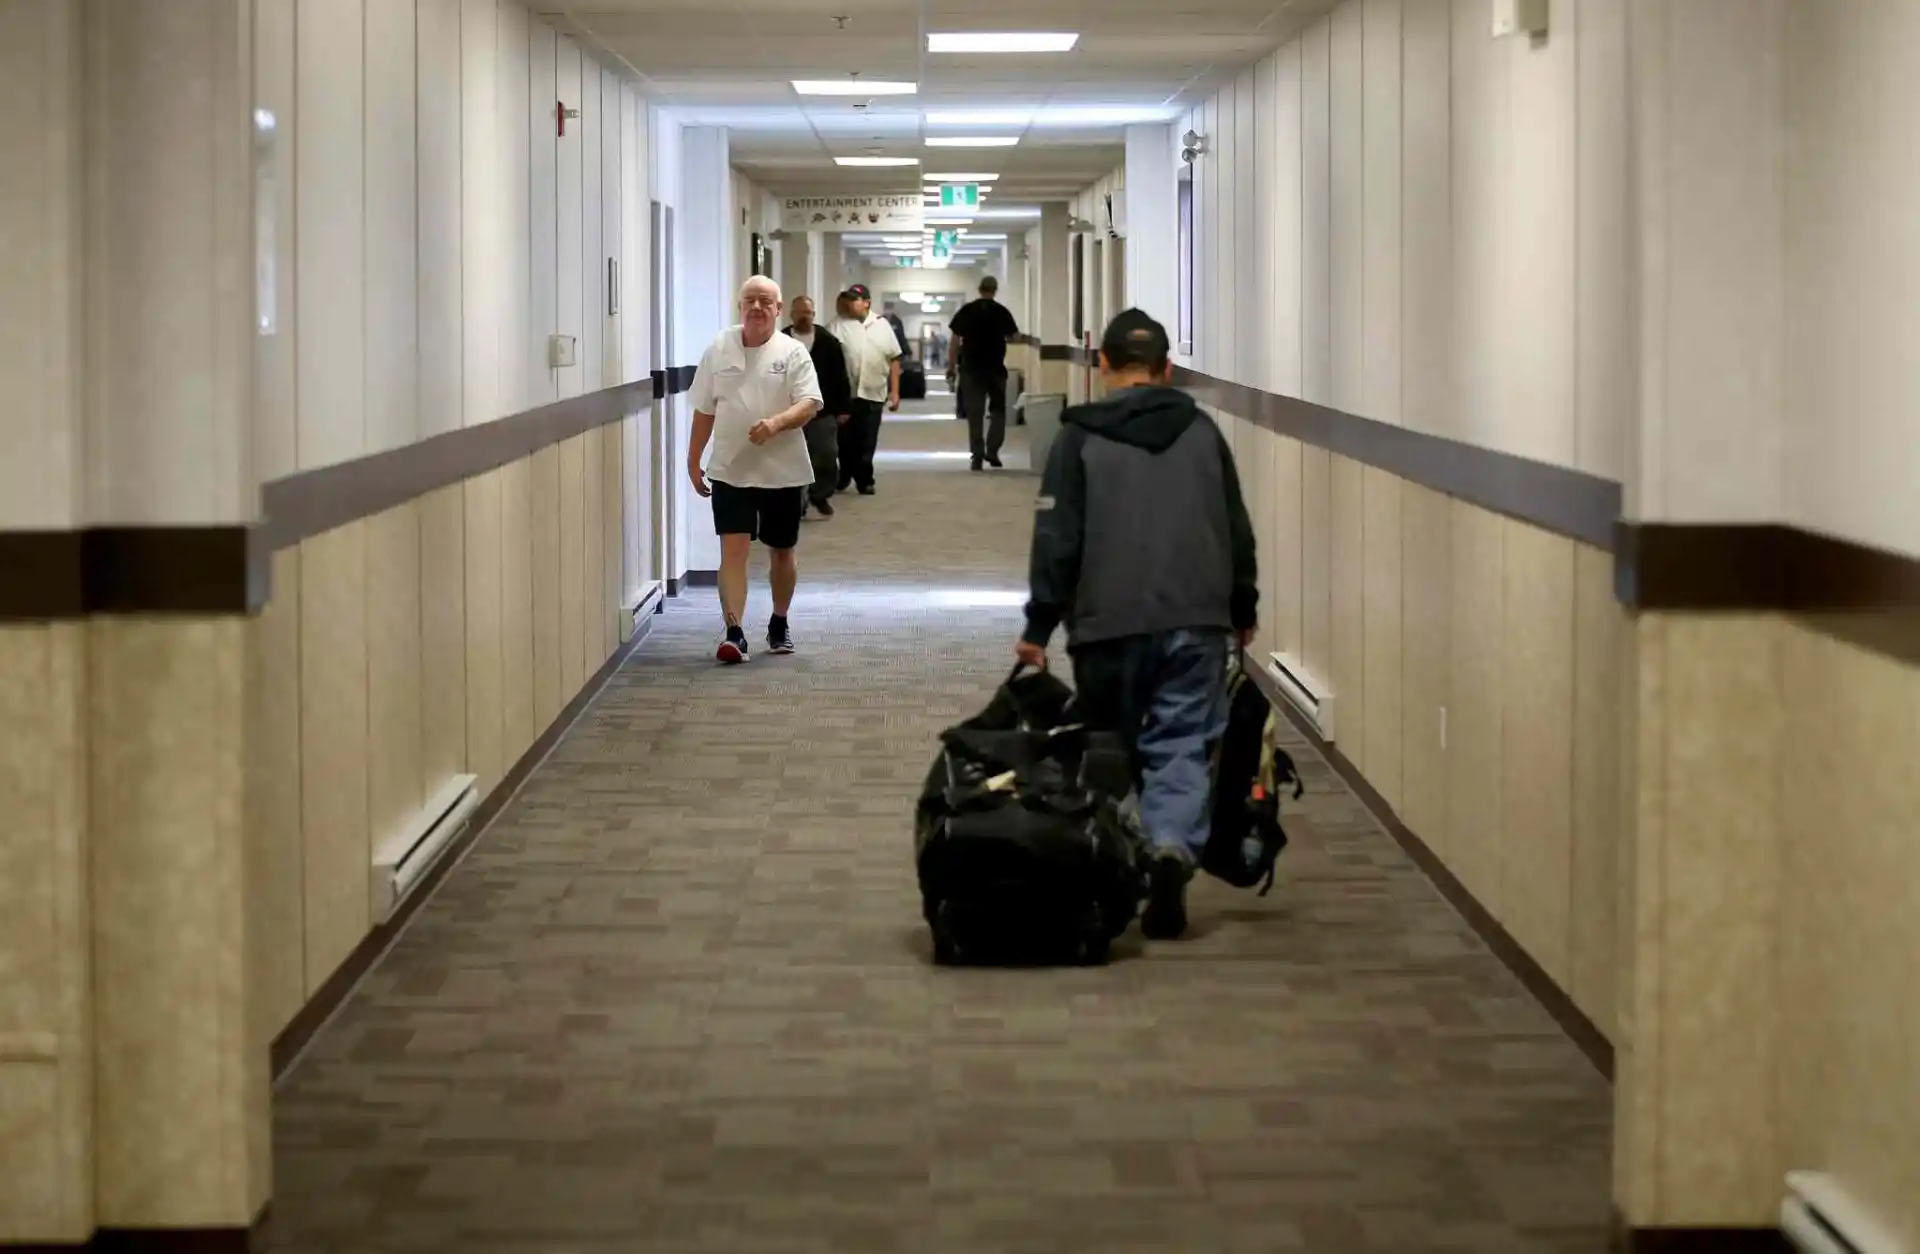 Workers walk down the long hallway of a work camp accommodation facility.